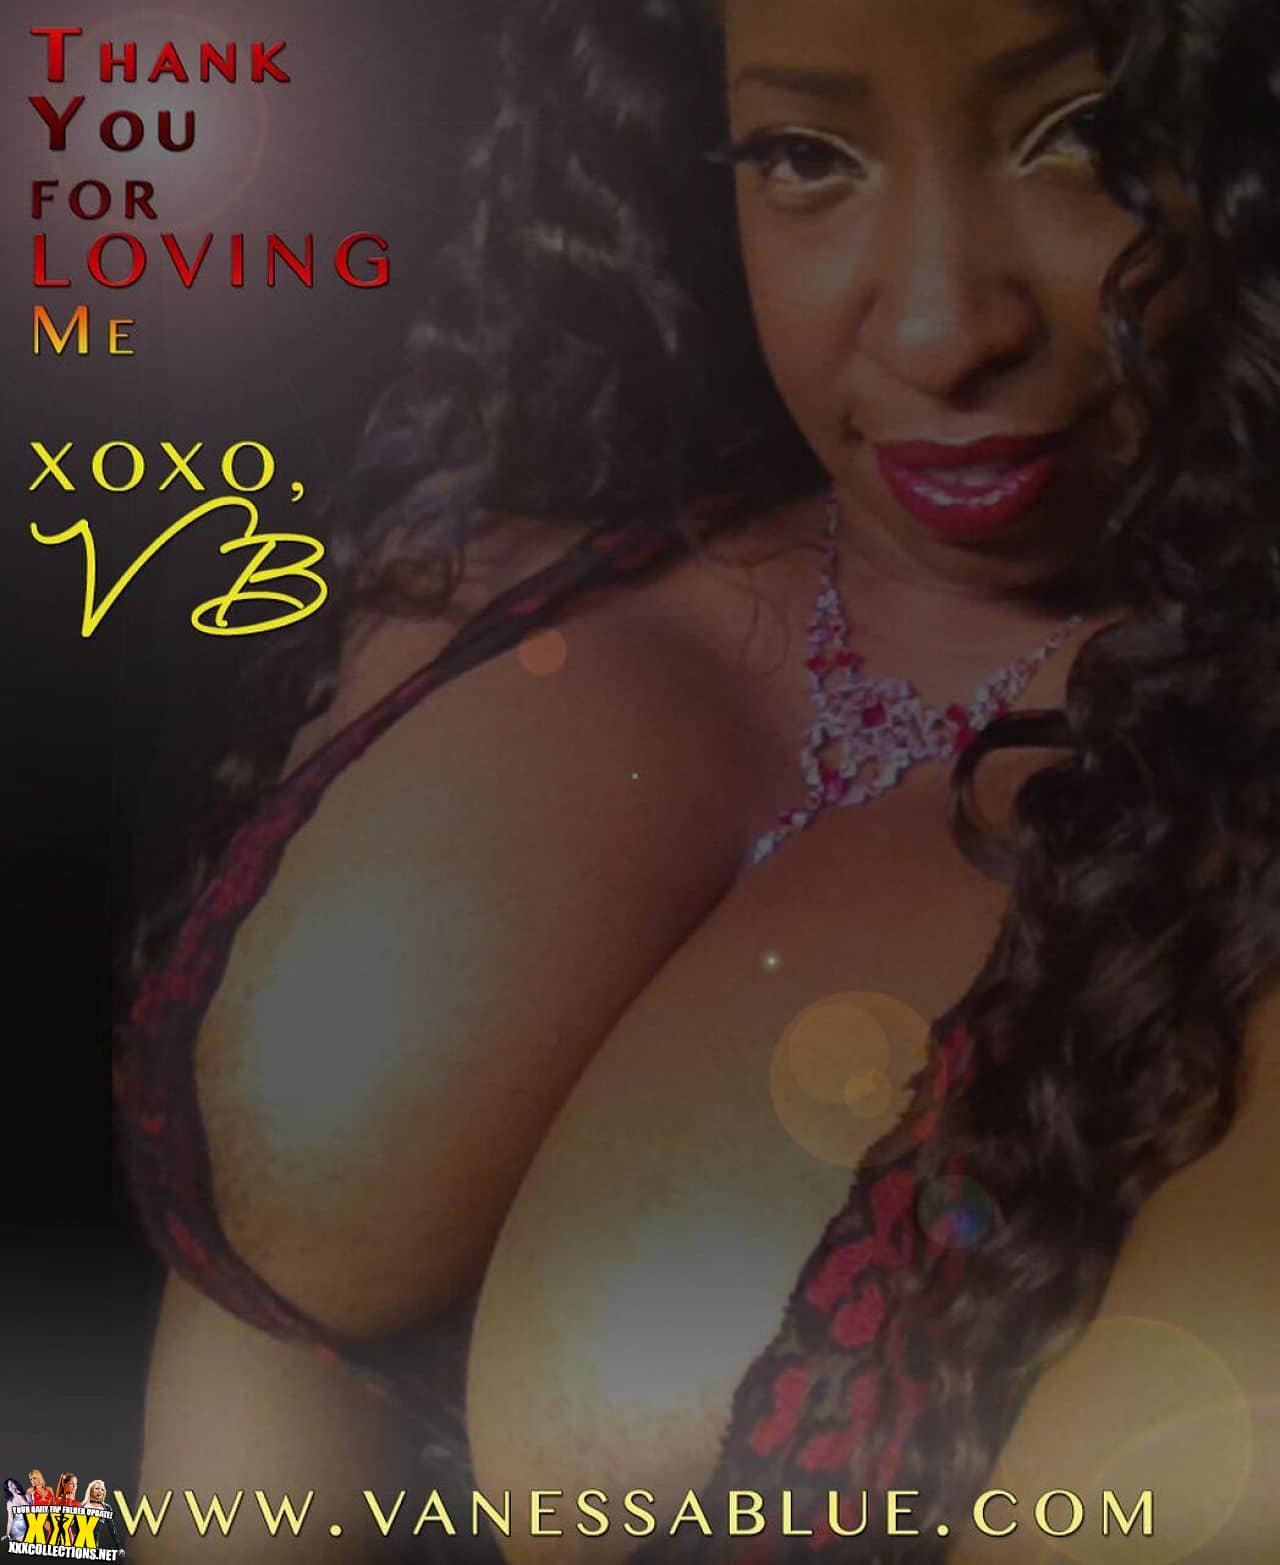 Fall in Love with Vanessa Blue's Exquisite Curves in This Gallery